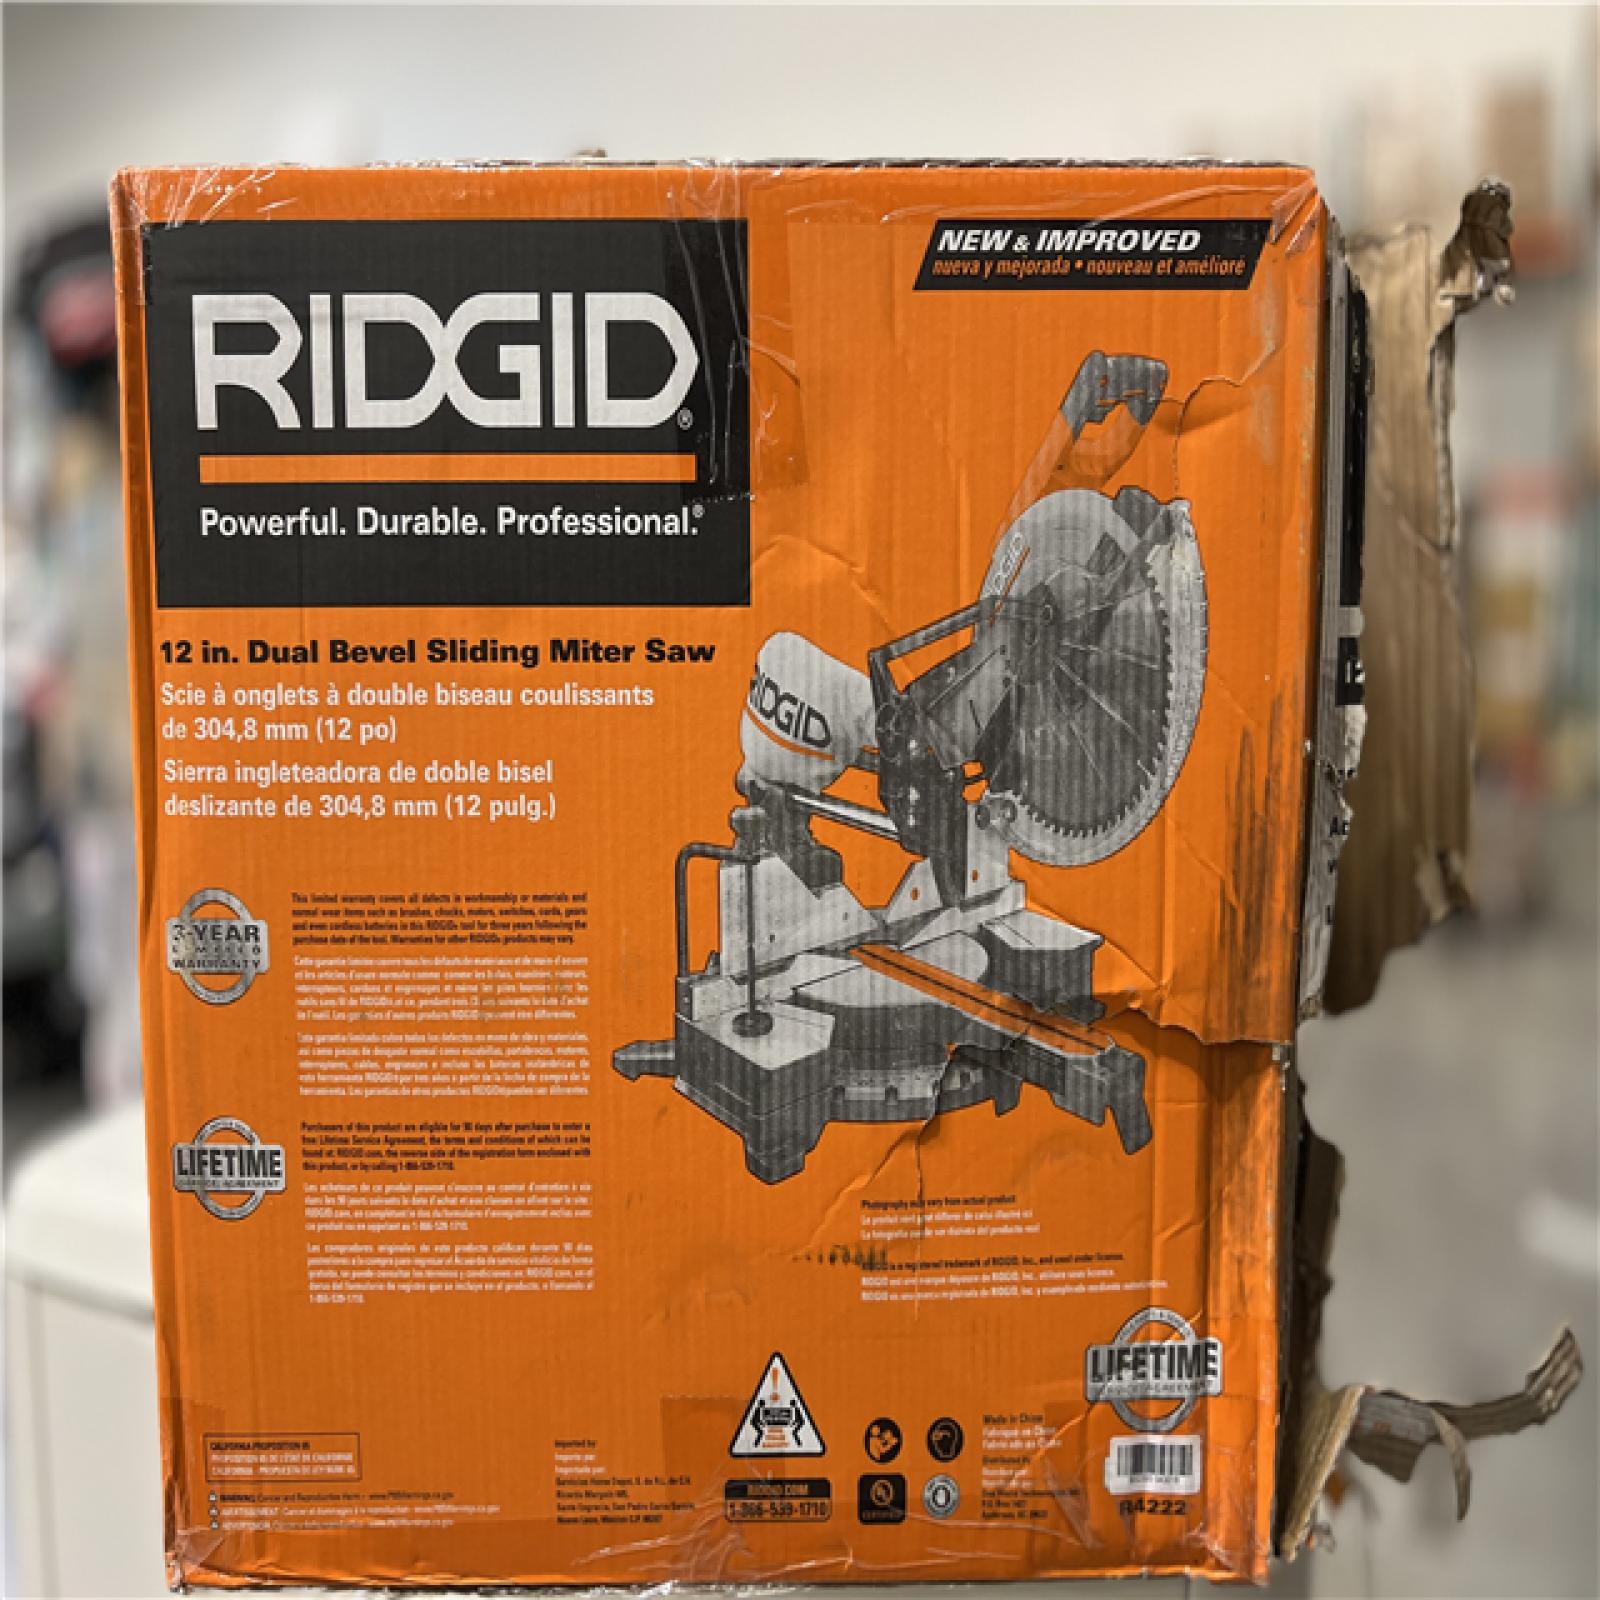 DALLAS LOCATION - RIDGID 15 Amp Corded 12 in. Dual Bevel Sliding Miter Saw with 70 Deg. Miter Capacity and LED Cut Line Indicator